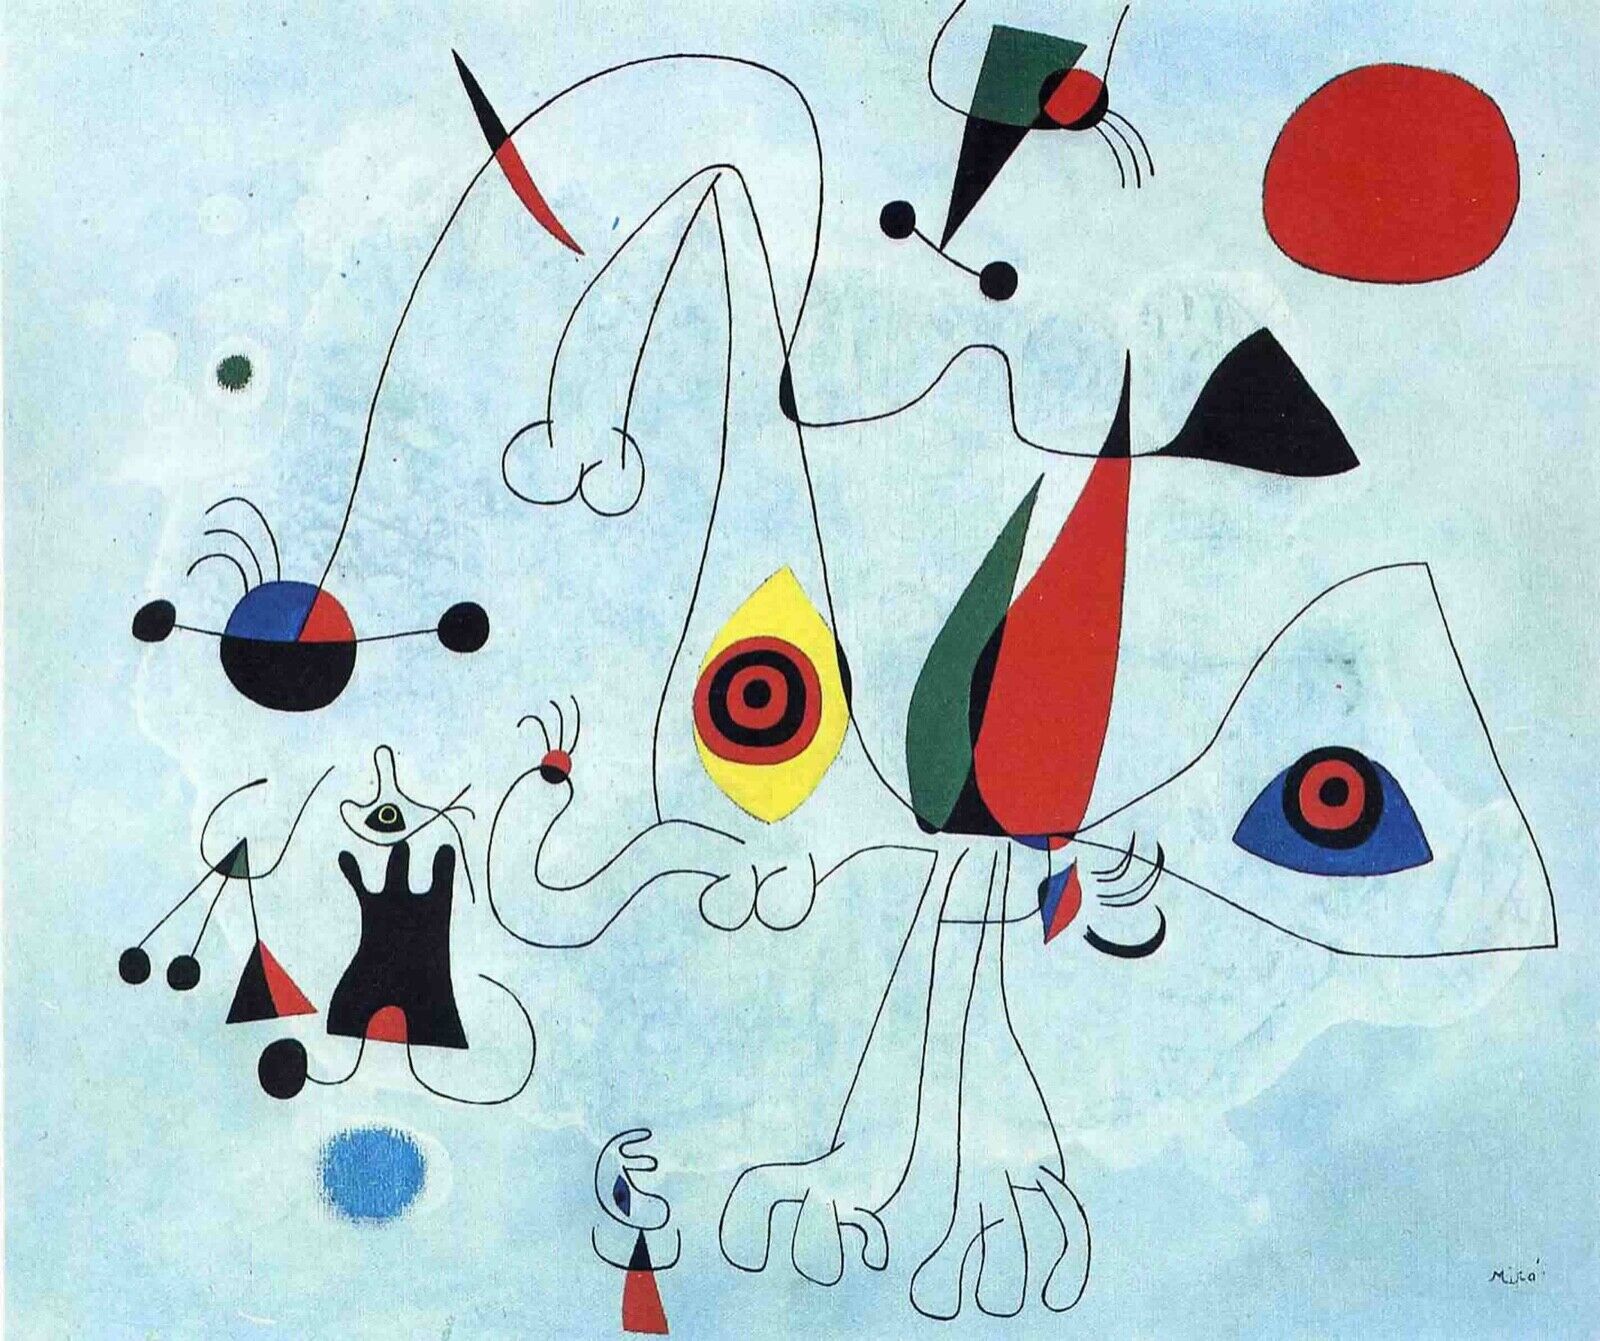 Woman and Birds at Sunrise : Joan Miró : 1946 : Archival Quality Art Print